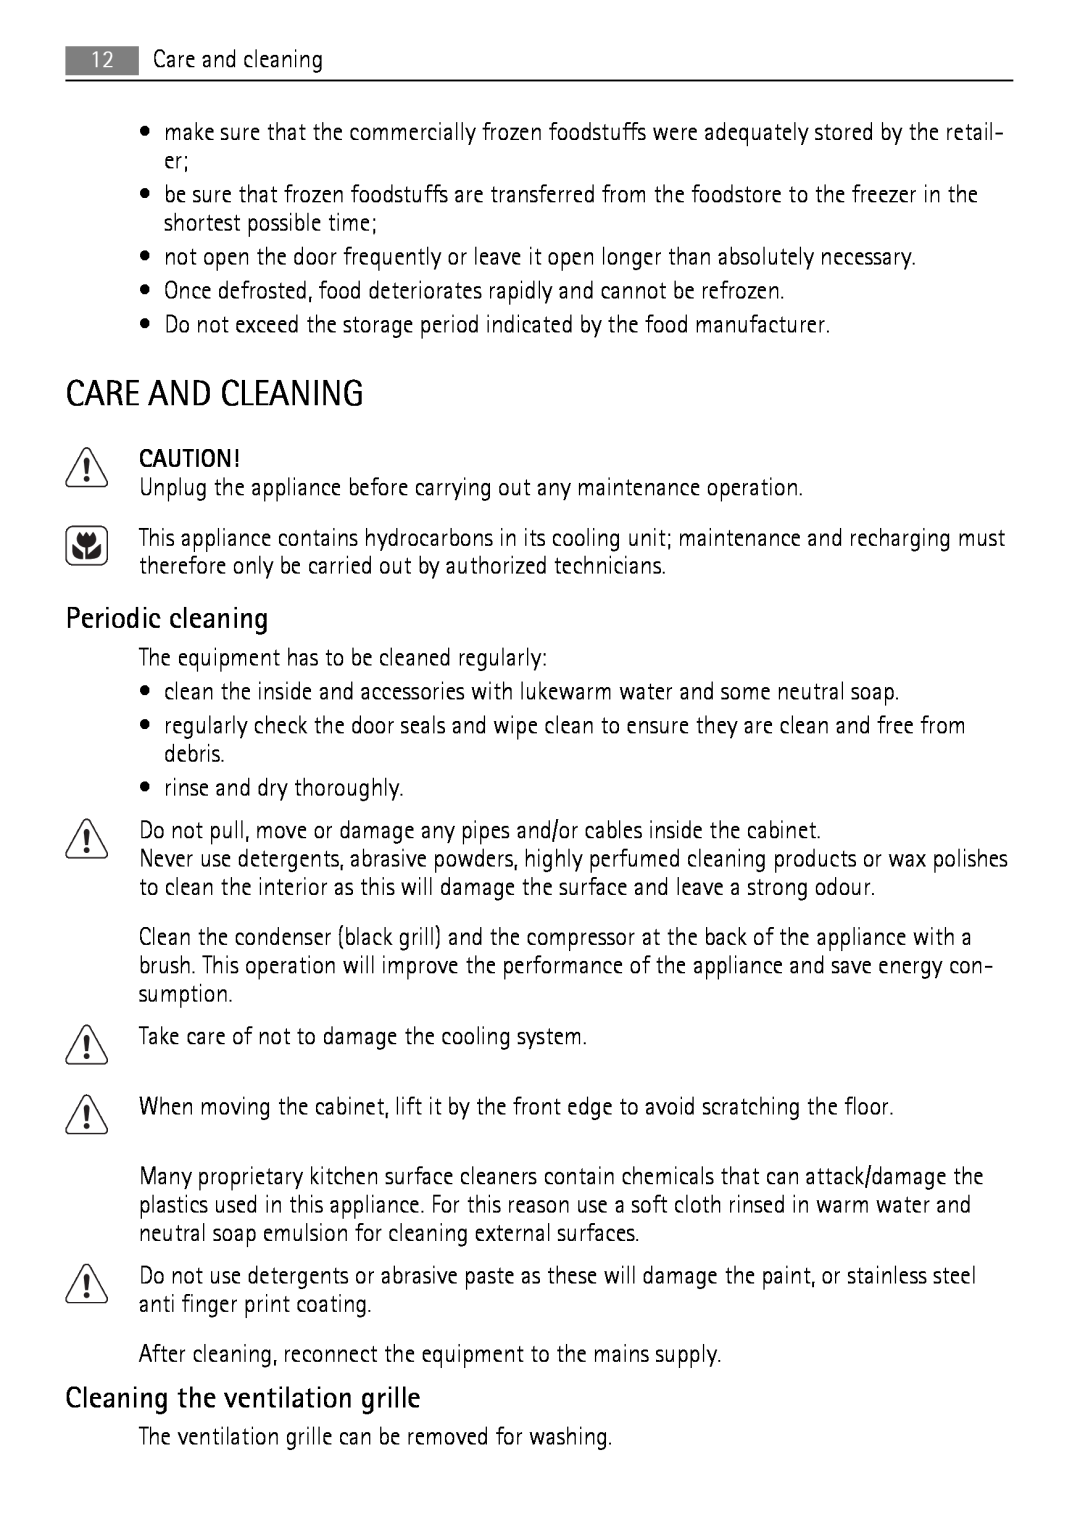 AEG AGN2901, AGN2451 user manual Care And Cleaning, Periodic cleaning, Cleaning the ventilation grille 